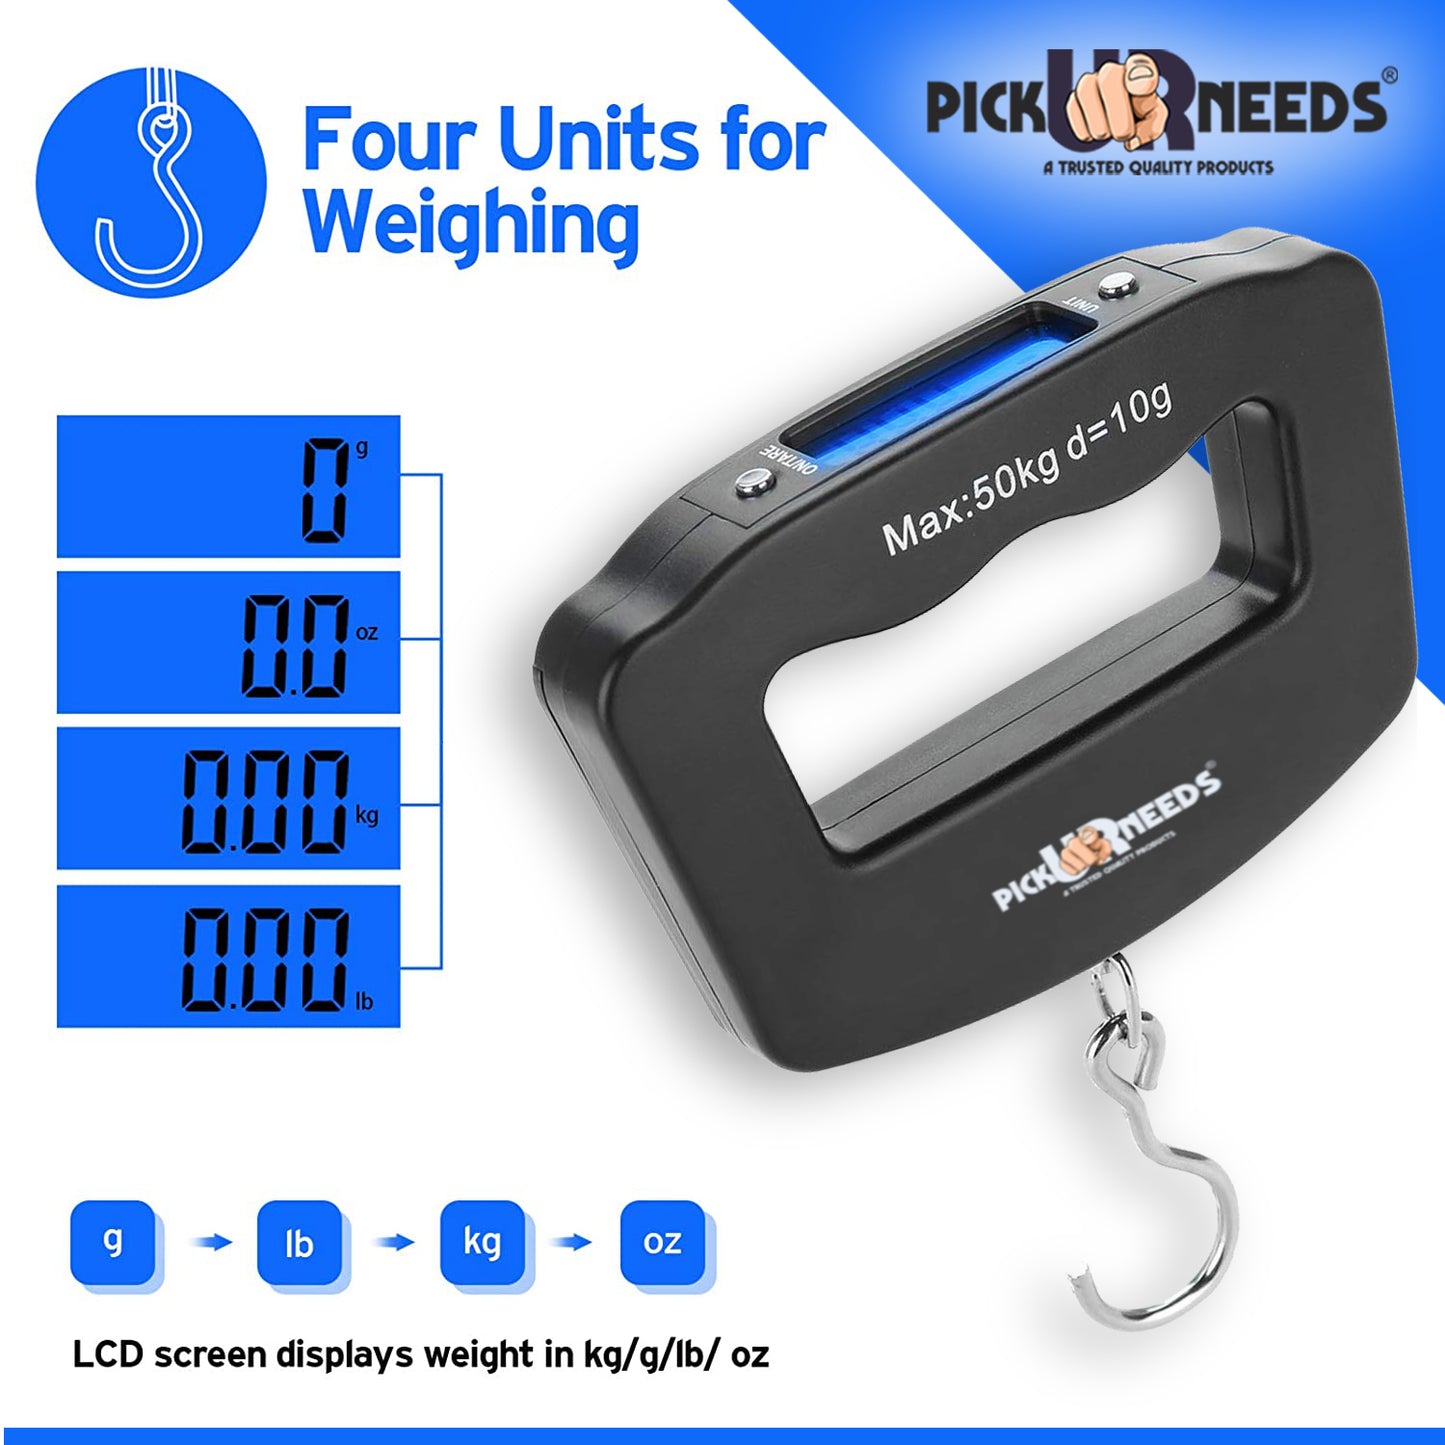 Pick Ur Needs Portable Digital Luggage Weighing Scale with Hook And 2 AAA Batteries | Lightweight And Durable Hanging Scale